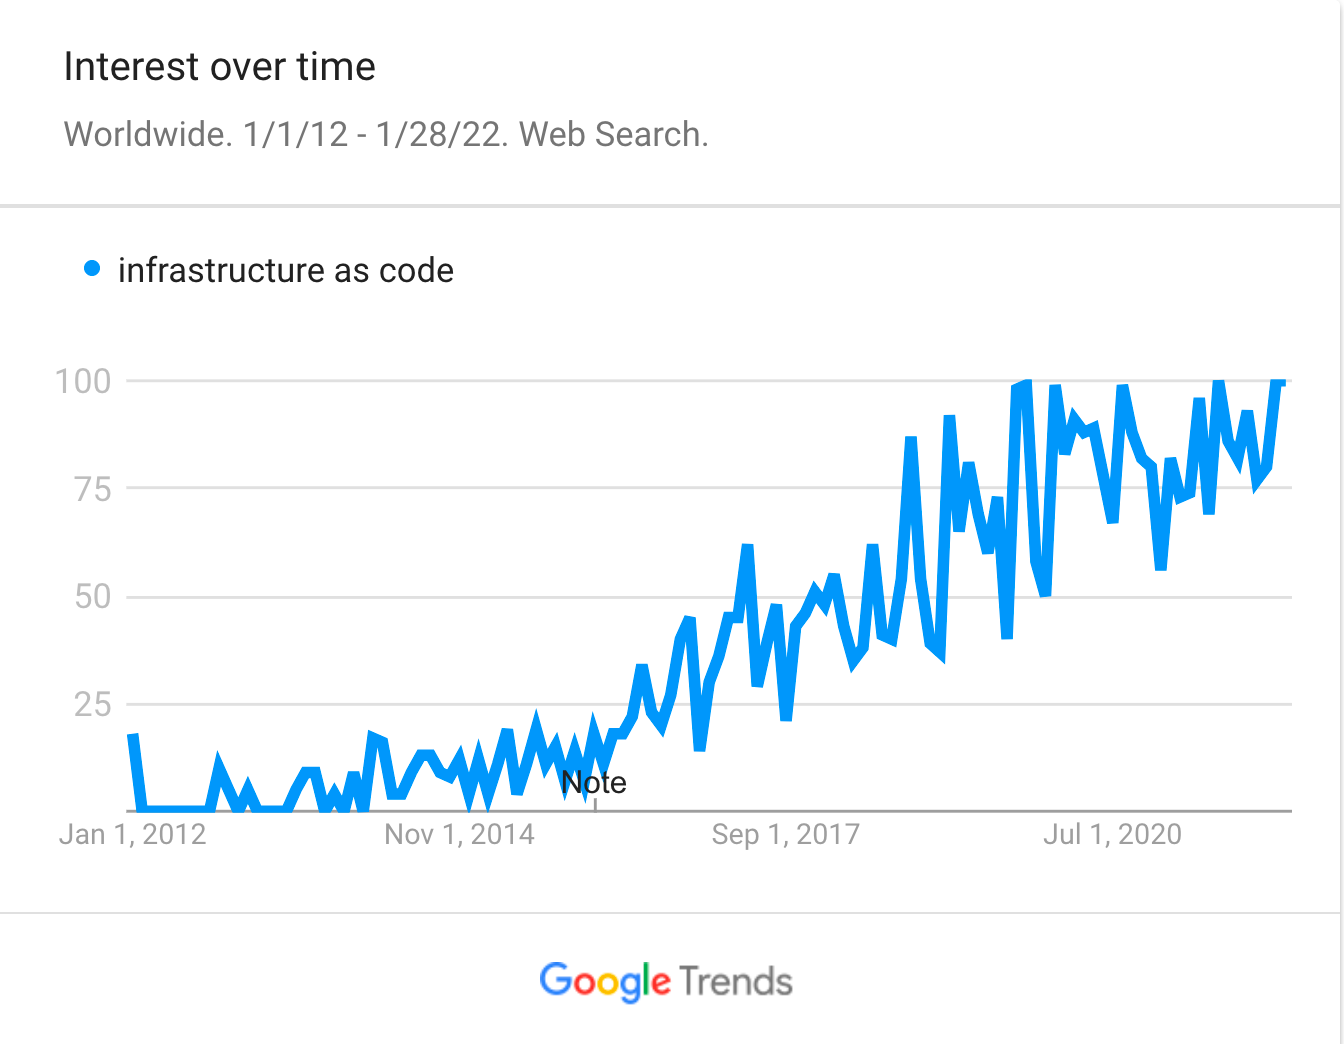 Infrastructure as Code interest over time